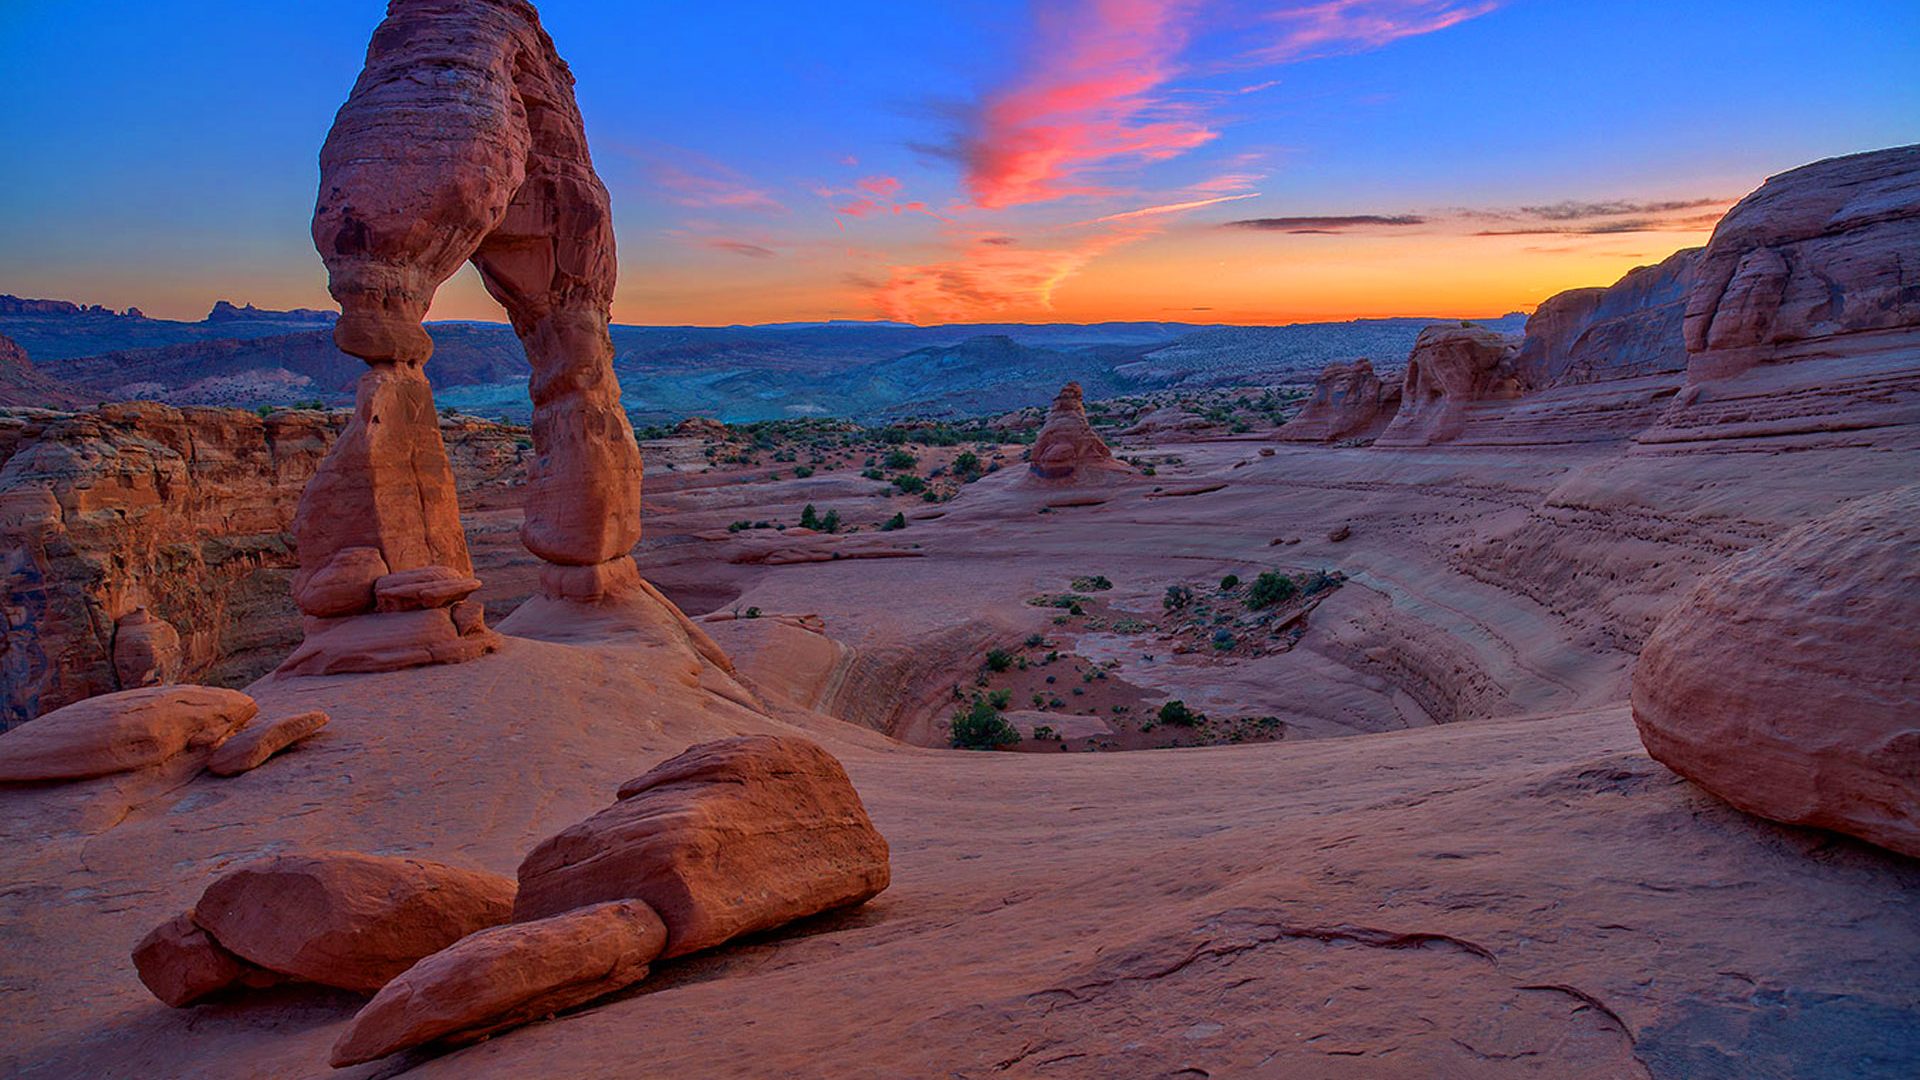 Arches National Park Wallpapers and Background Images   stmednet